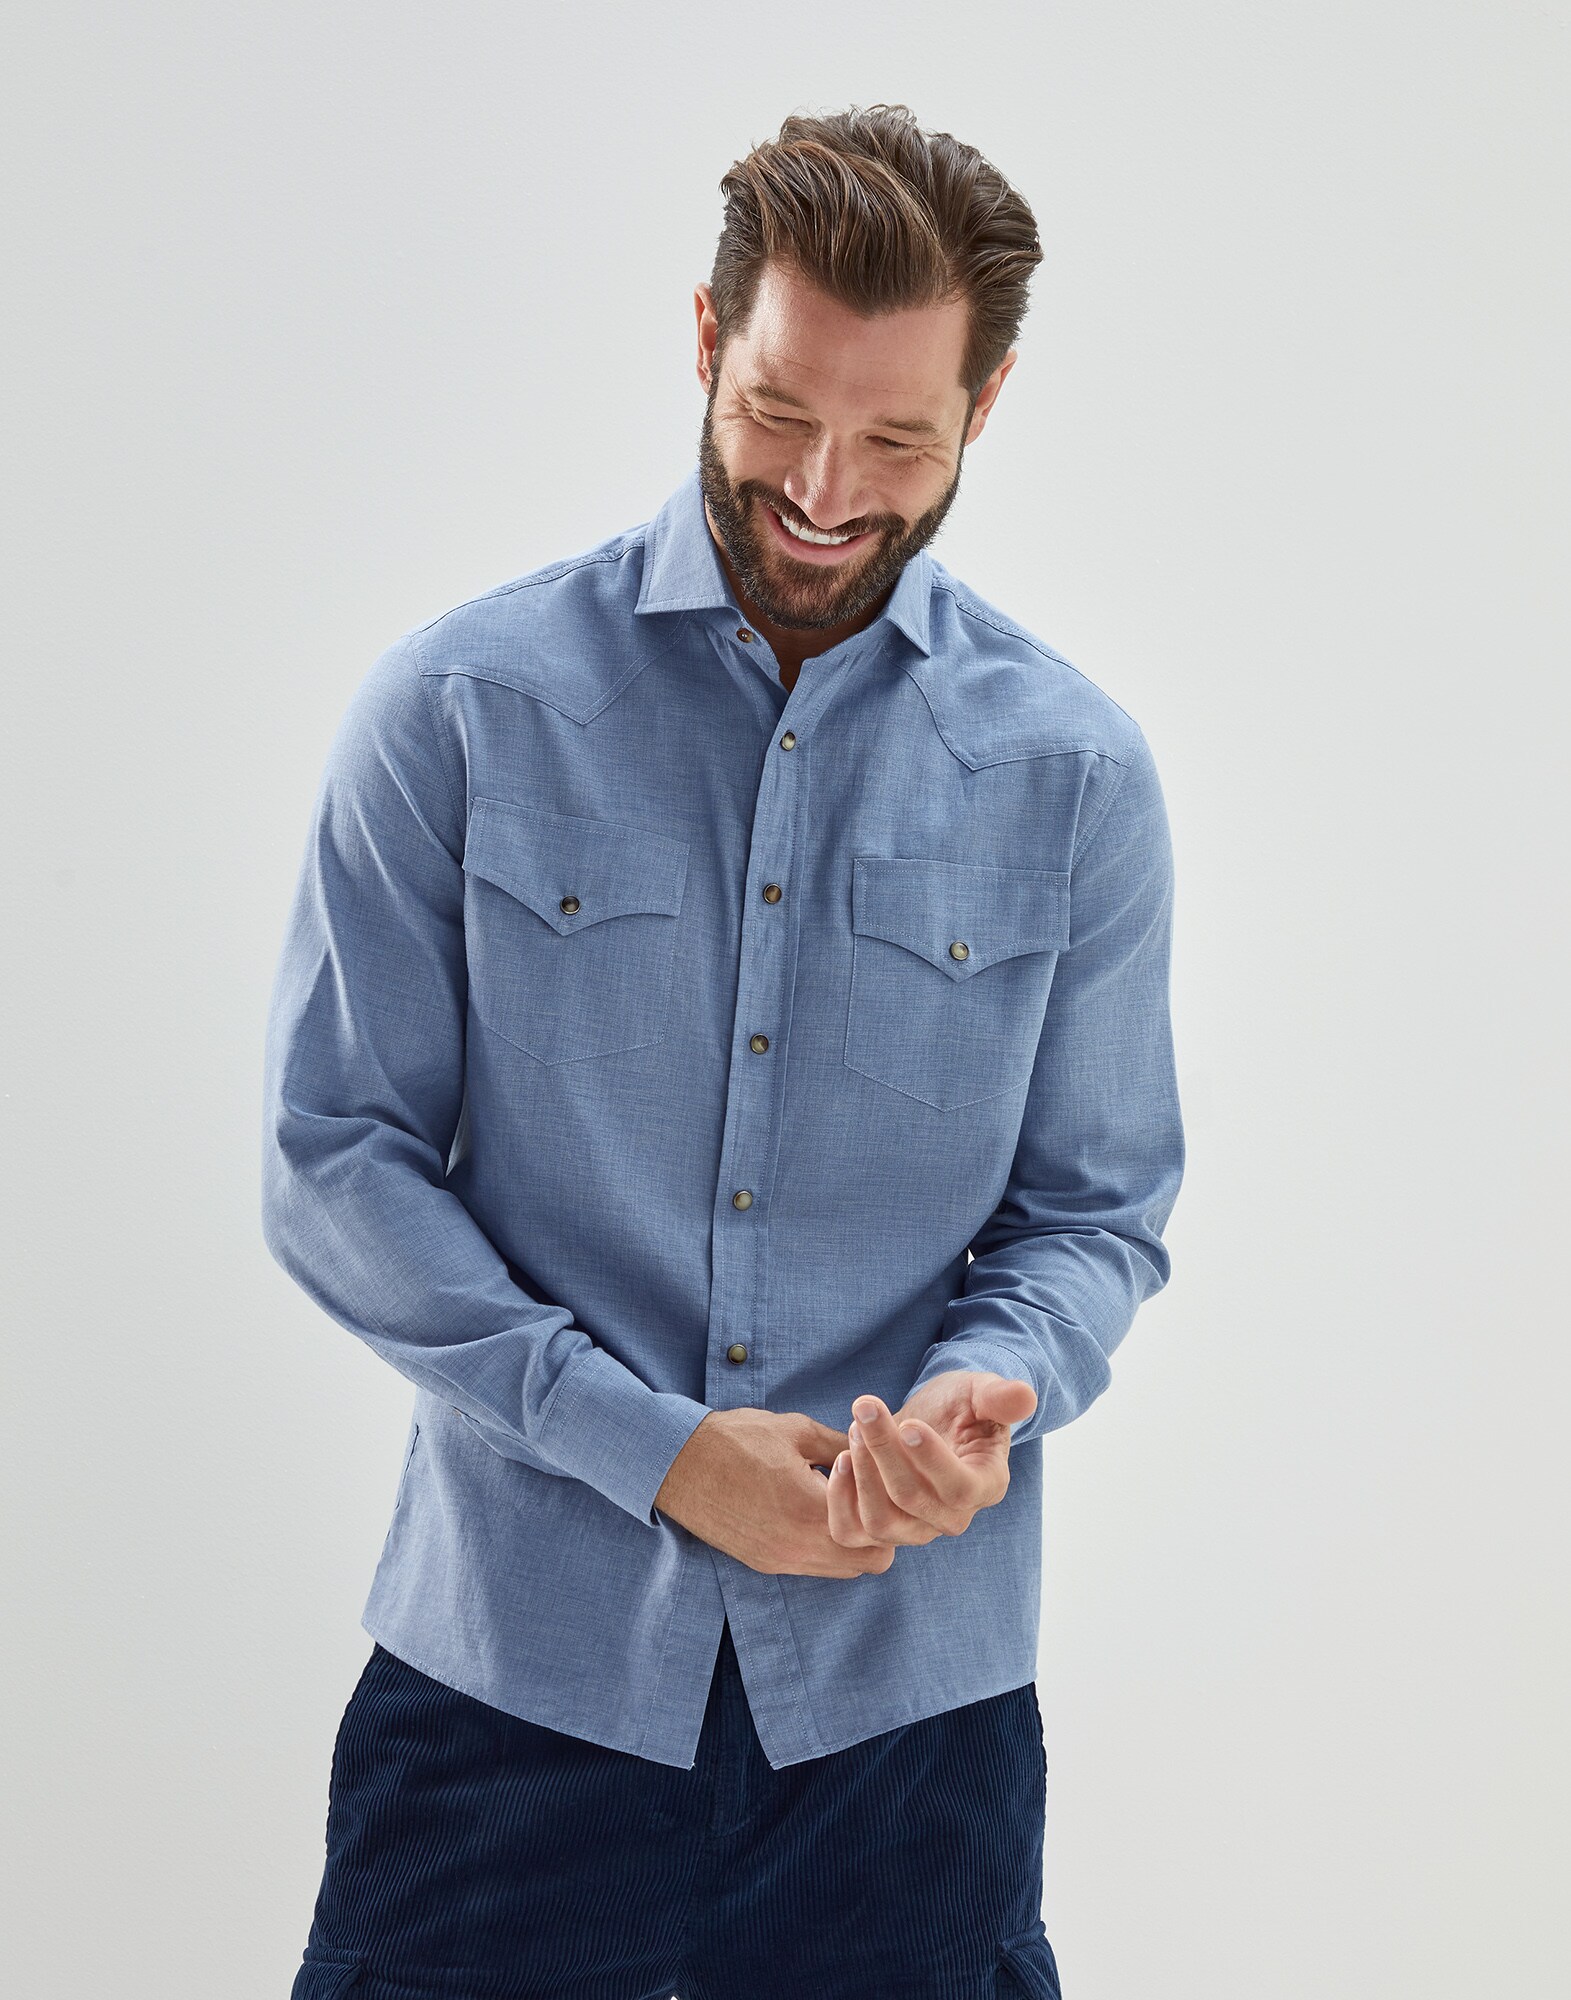 Leisure fit shirt